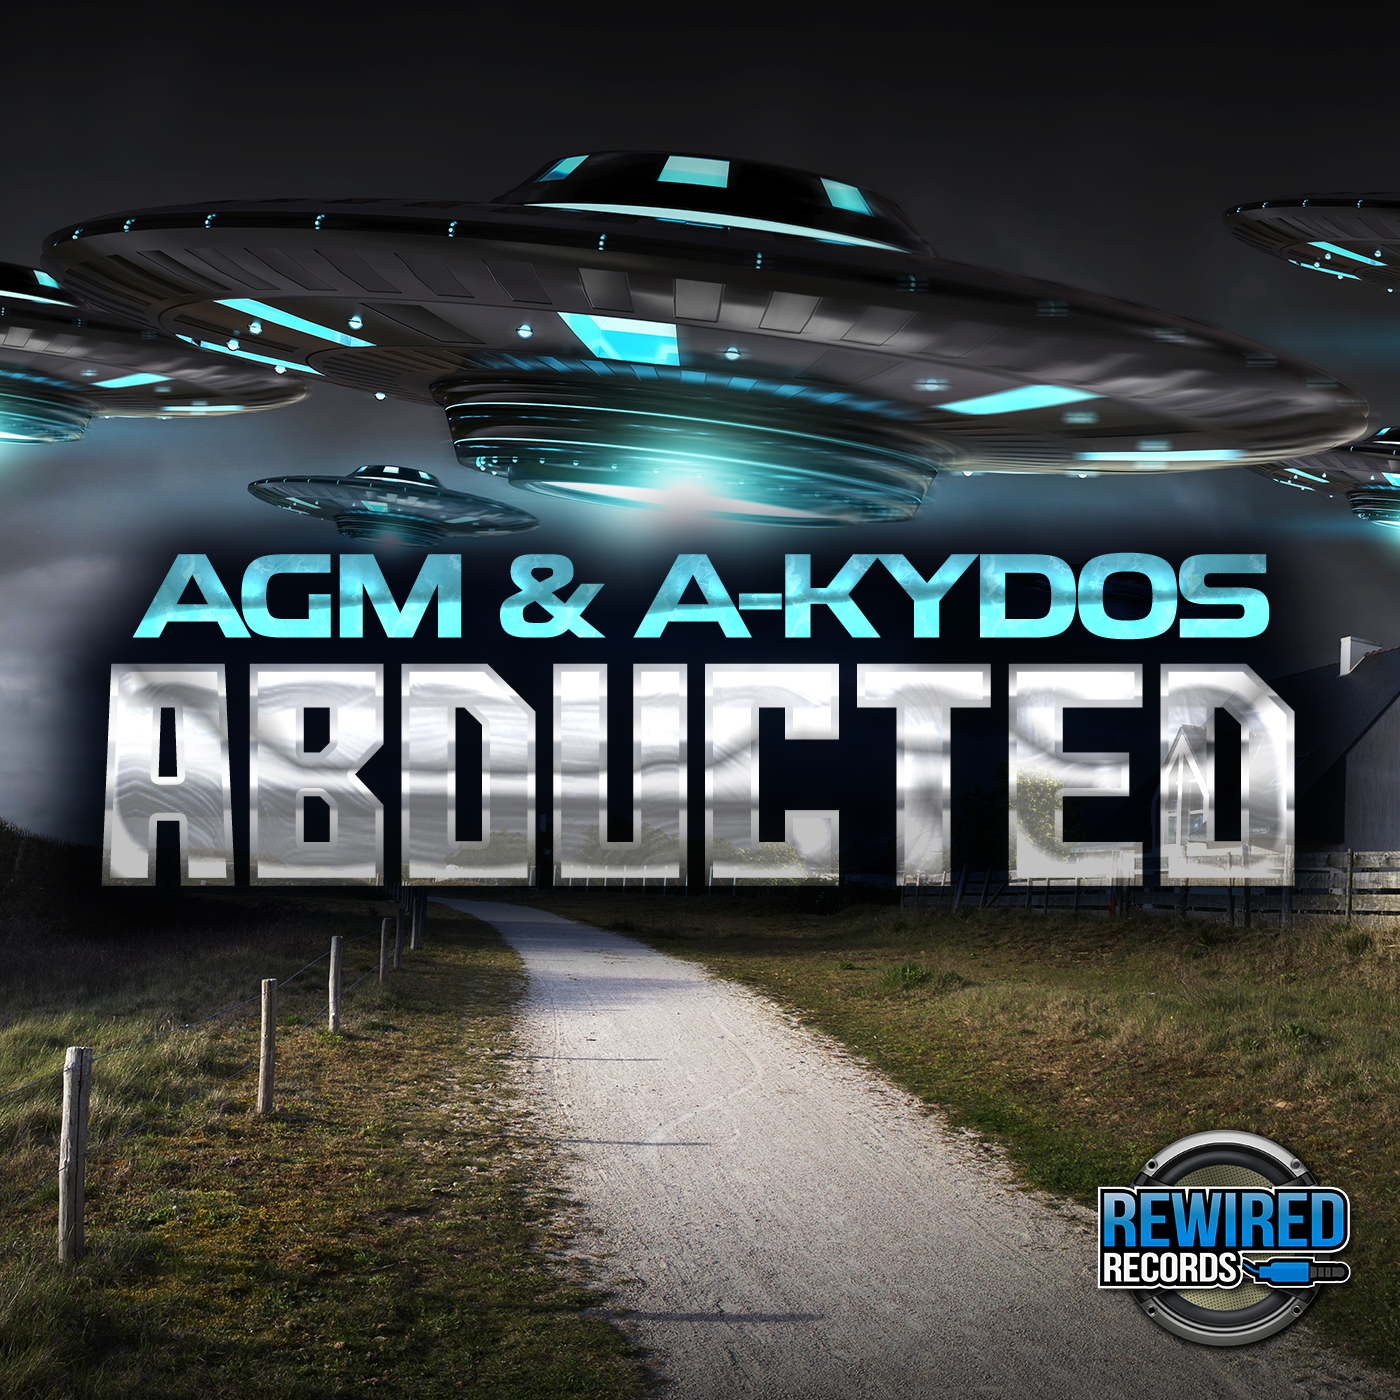 AGM & A-kydos - Abducted - Rewired Records